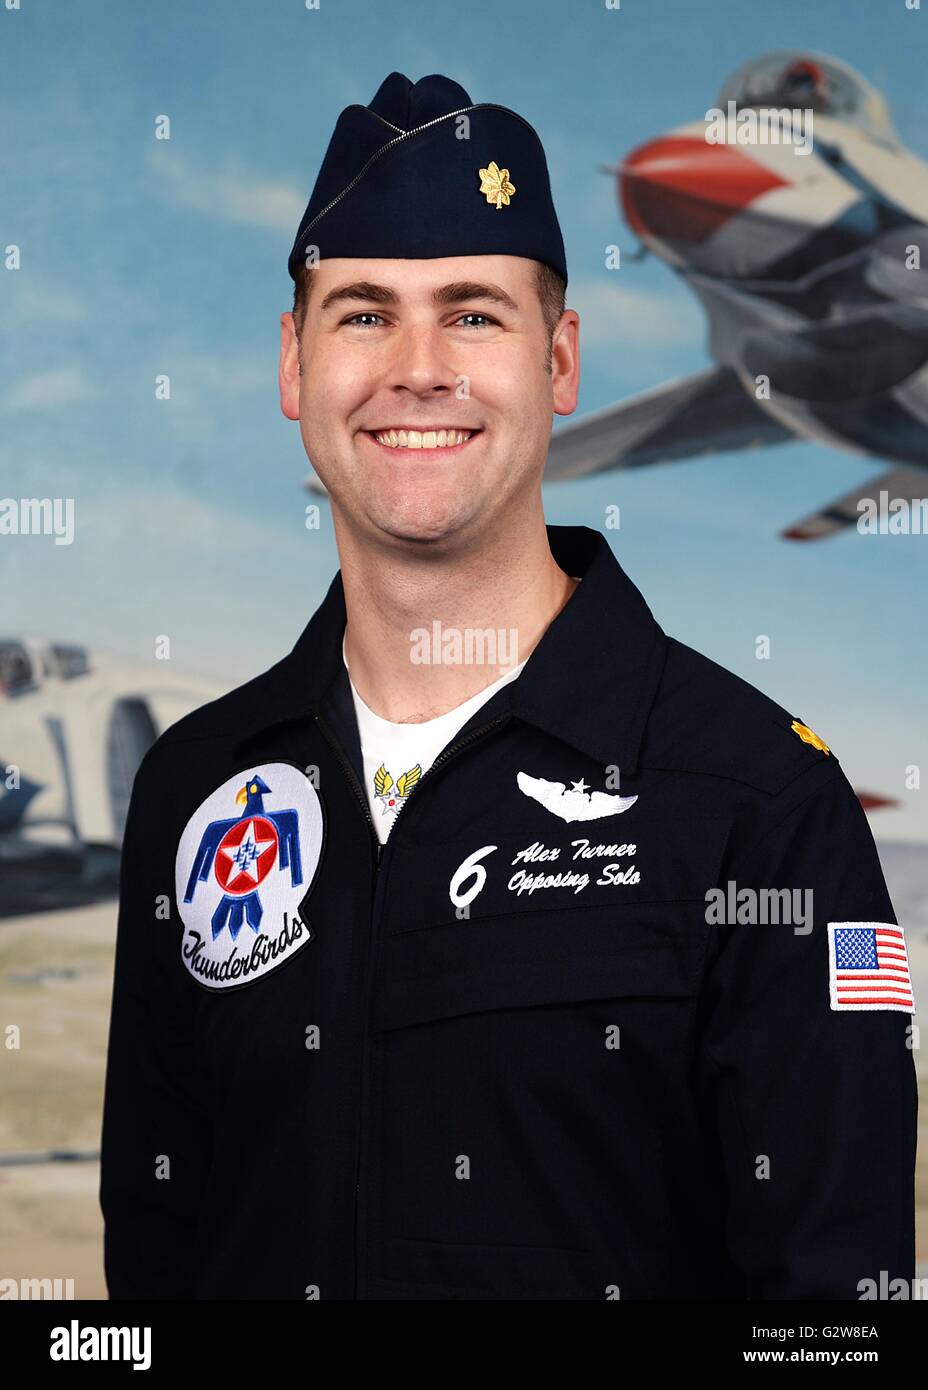 U.S Air Force Thunderbirds F-16 Fighting Falcon fighter pilot Maj. Alex Turner January 7, 2016. Shortly after performing a flyover at the USAF Academy graduation on June 2, 2016 Turner's aircraft went down in a field. Turner walked away after safely ejecting. Credit:  Planetpix/Alamy Live News Stock Photo